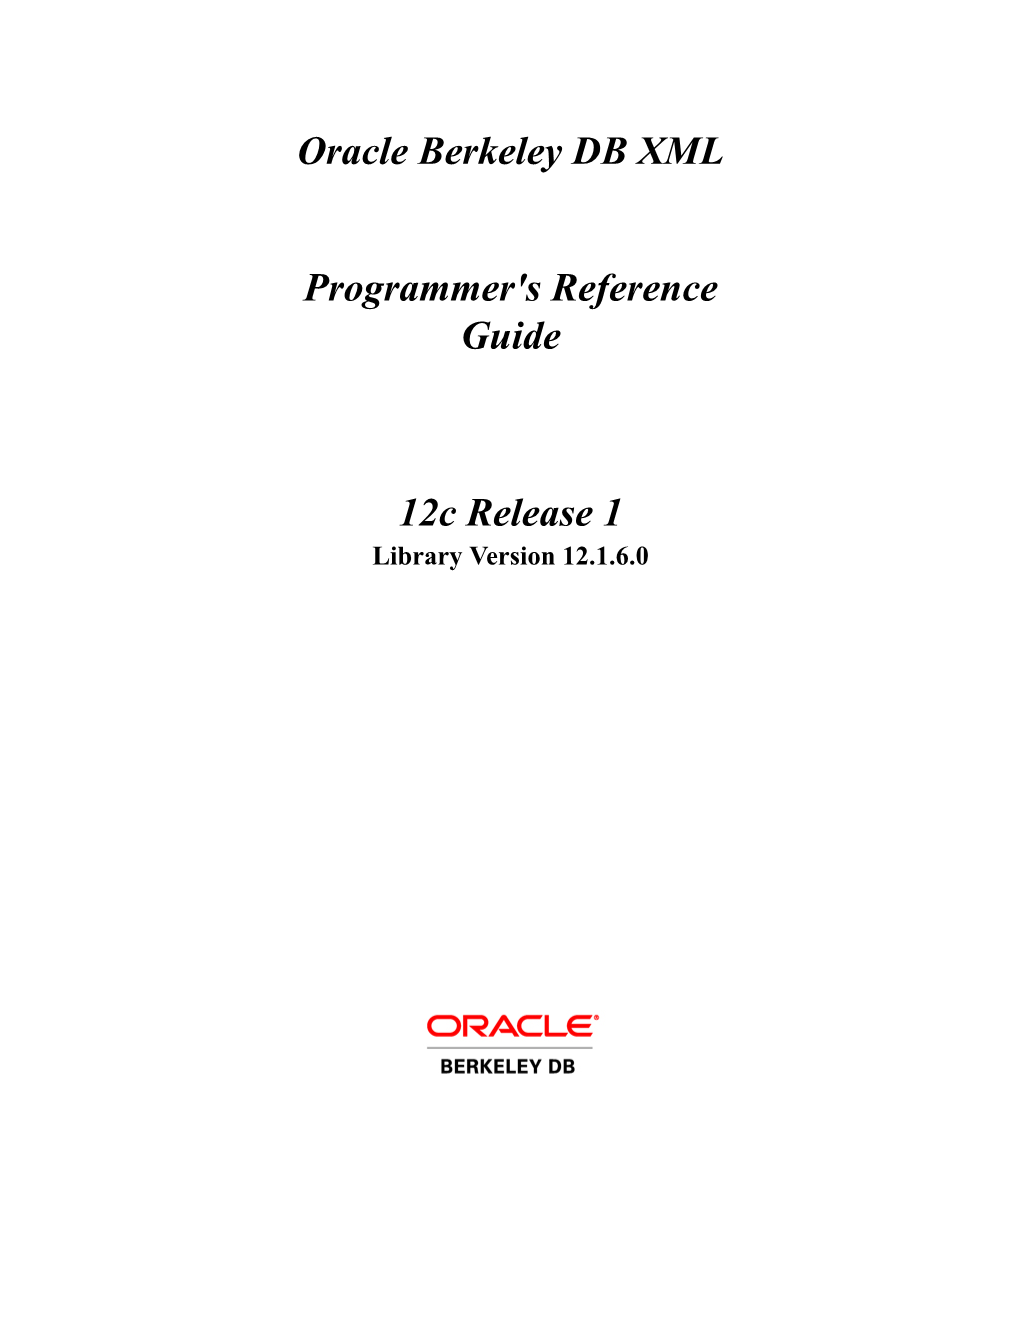 Oracle Berkeley DB XML Programmer's Reference Guide 12C